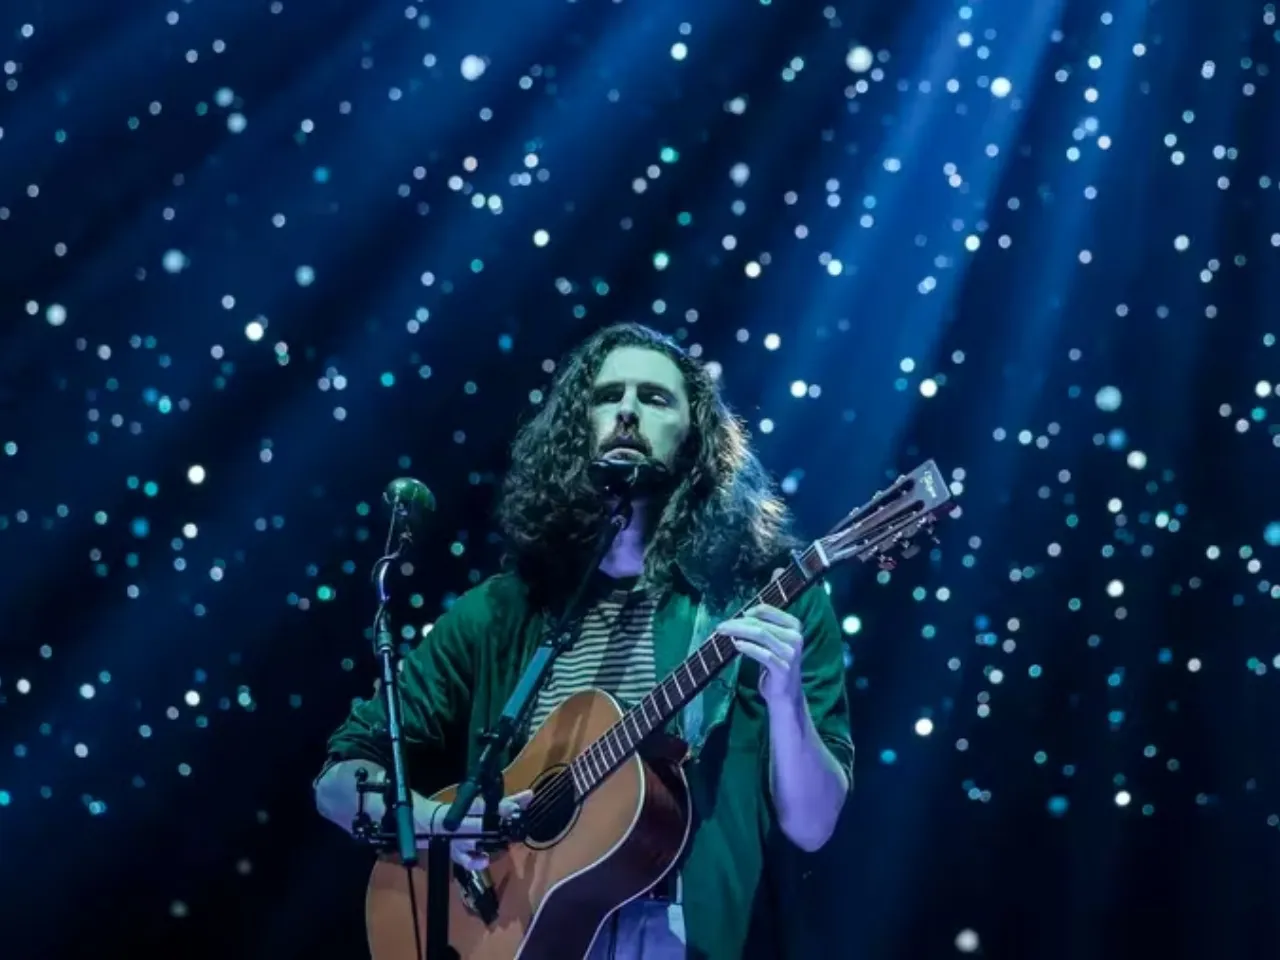 Hozier ignites a new kind of love in me and I want to experience it atleast once!